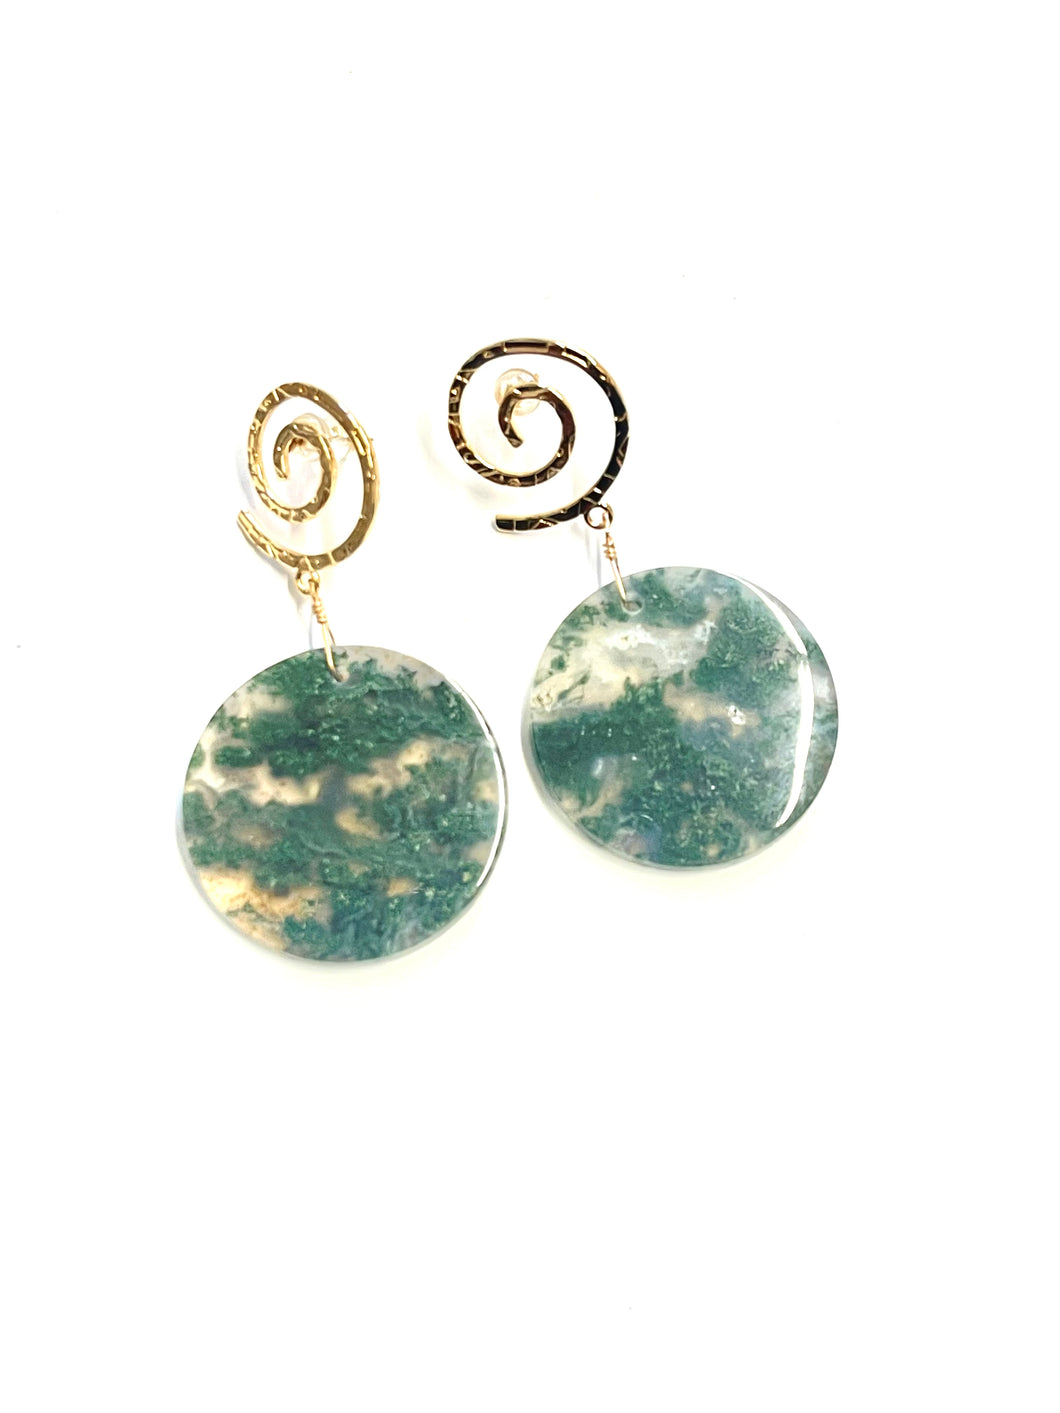 Earrings with green moss agate